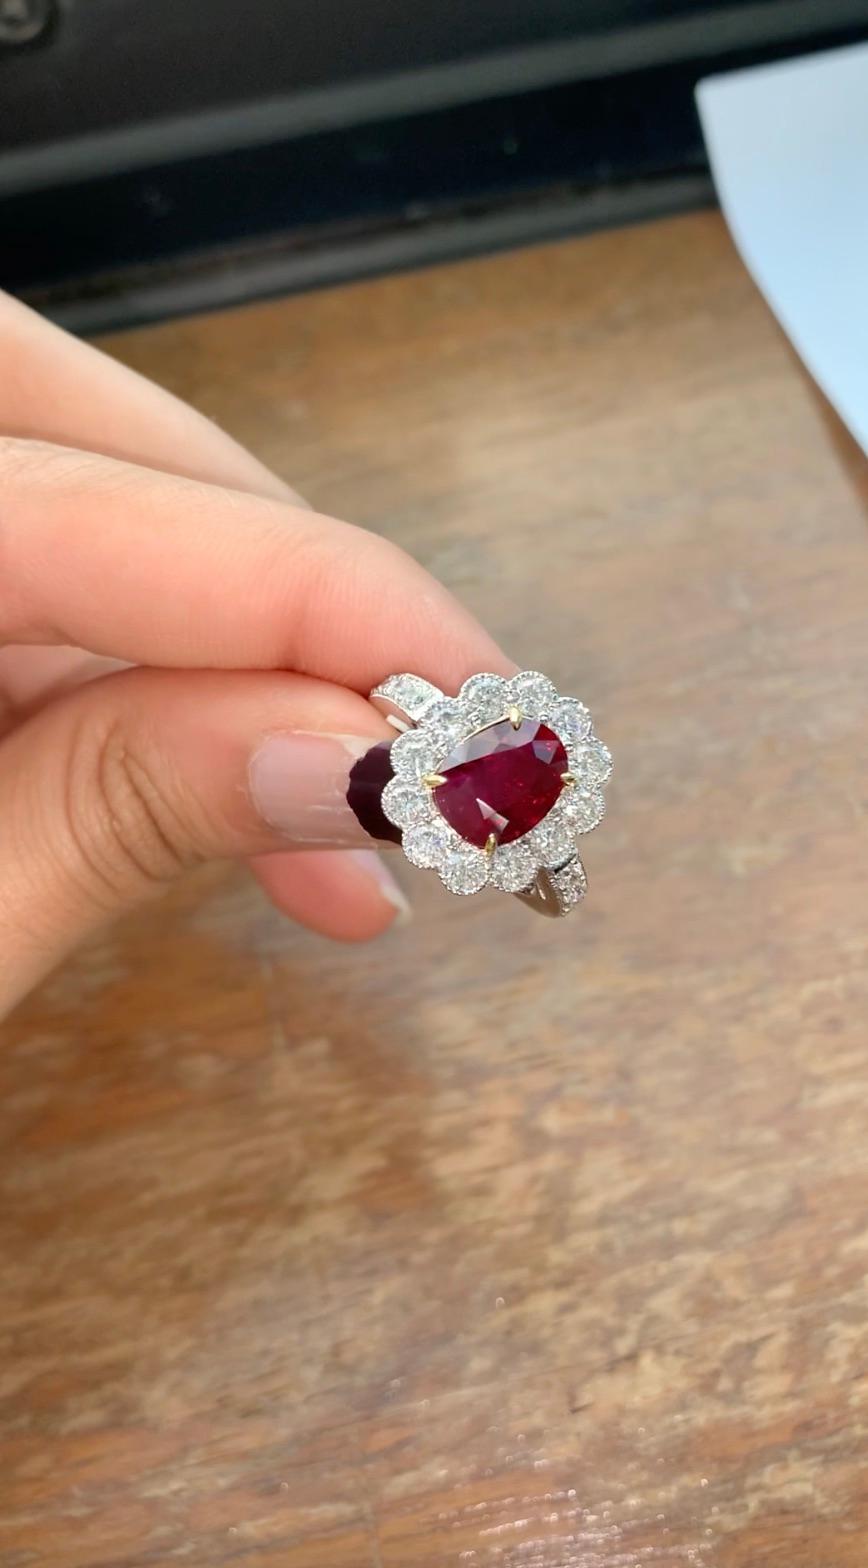 A brand new handcrafted ruby ring by Rewa Jewels. The ring's center stone is 4.01 carat Burmese ruby certified by Gem Research Swisslab (GRS) as natural, unheated, 'Pigeon blood' with the certificate number: 2023-101134. The stone has an additional